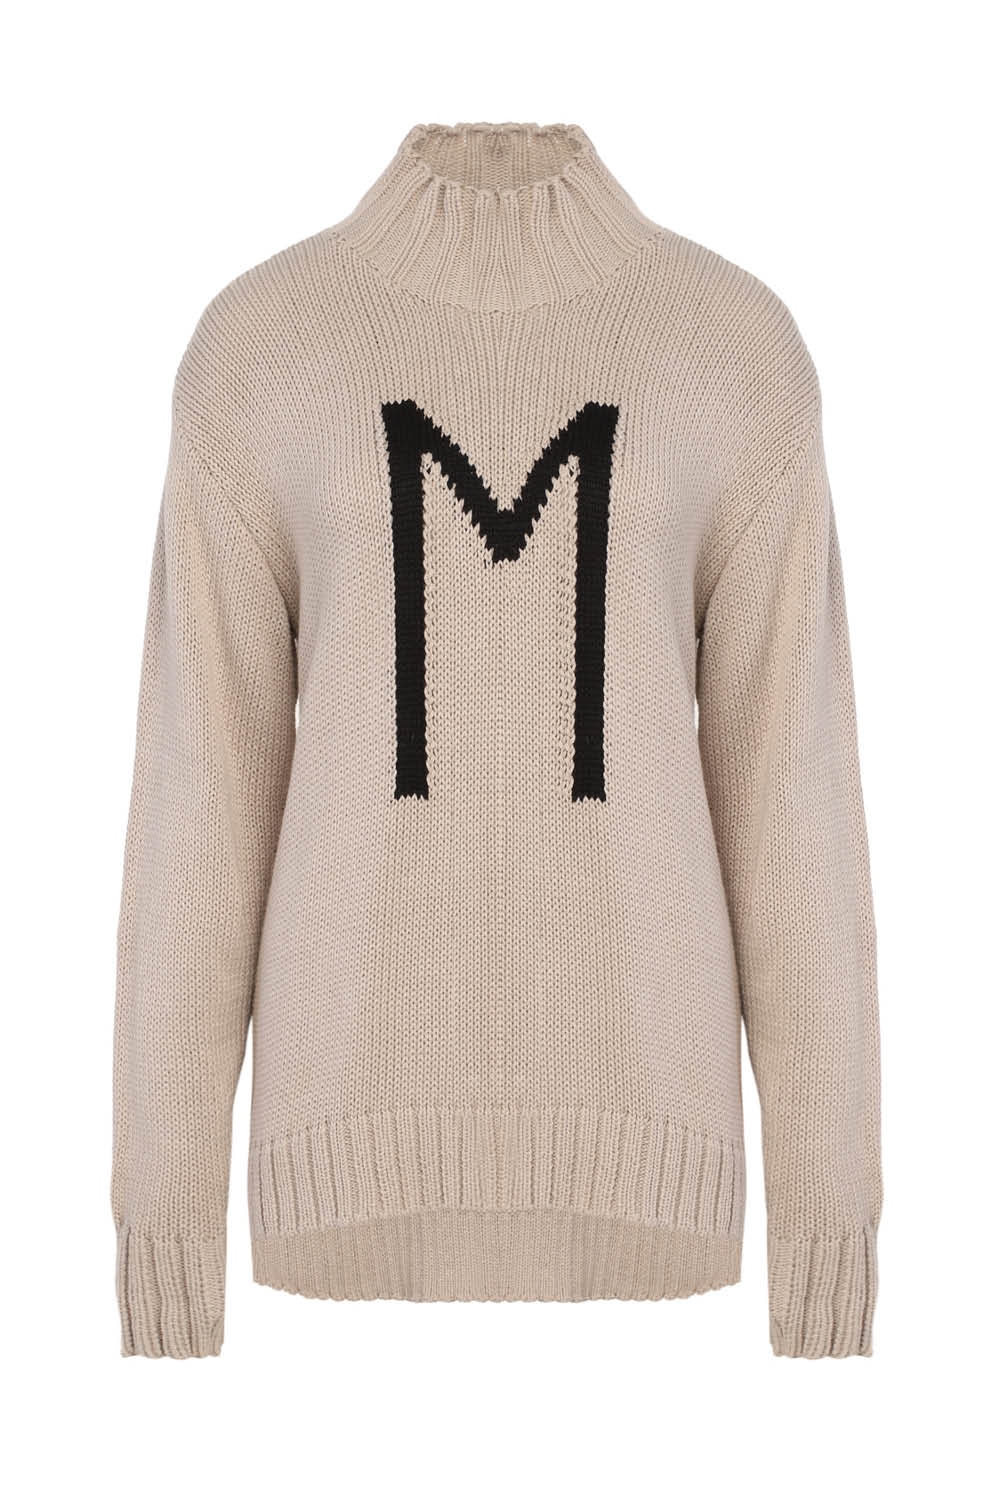 TURTLE NECK LETTER SWEATER IN SAND